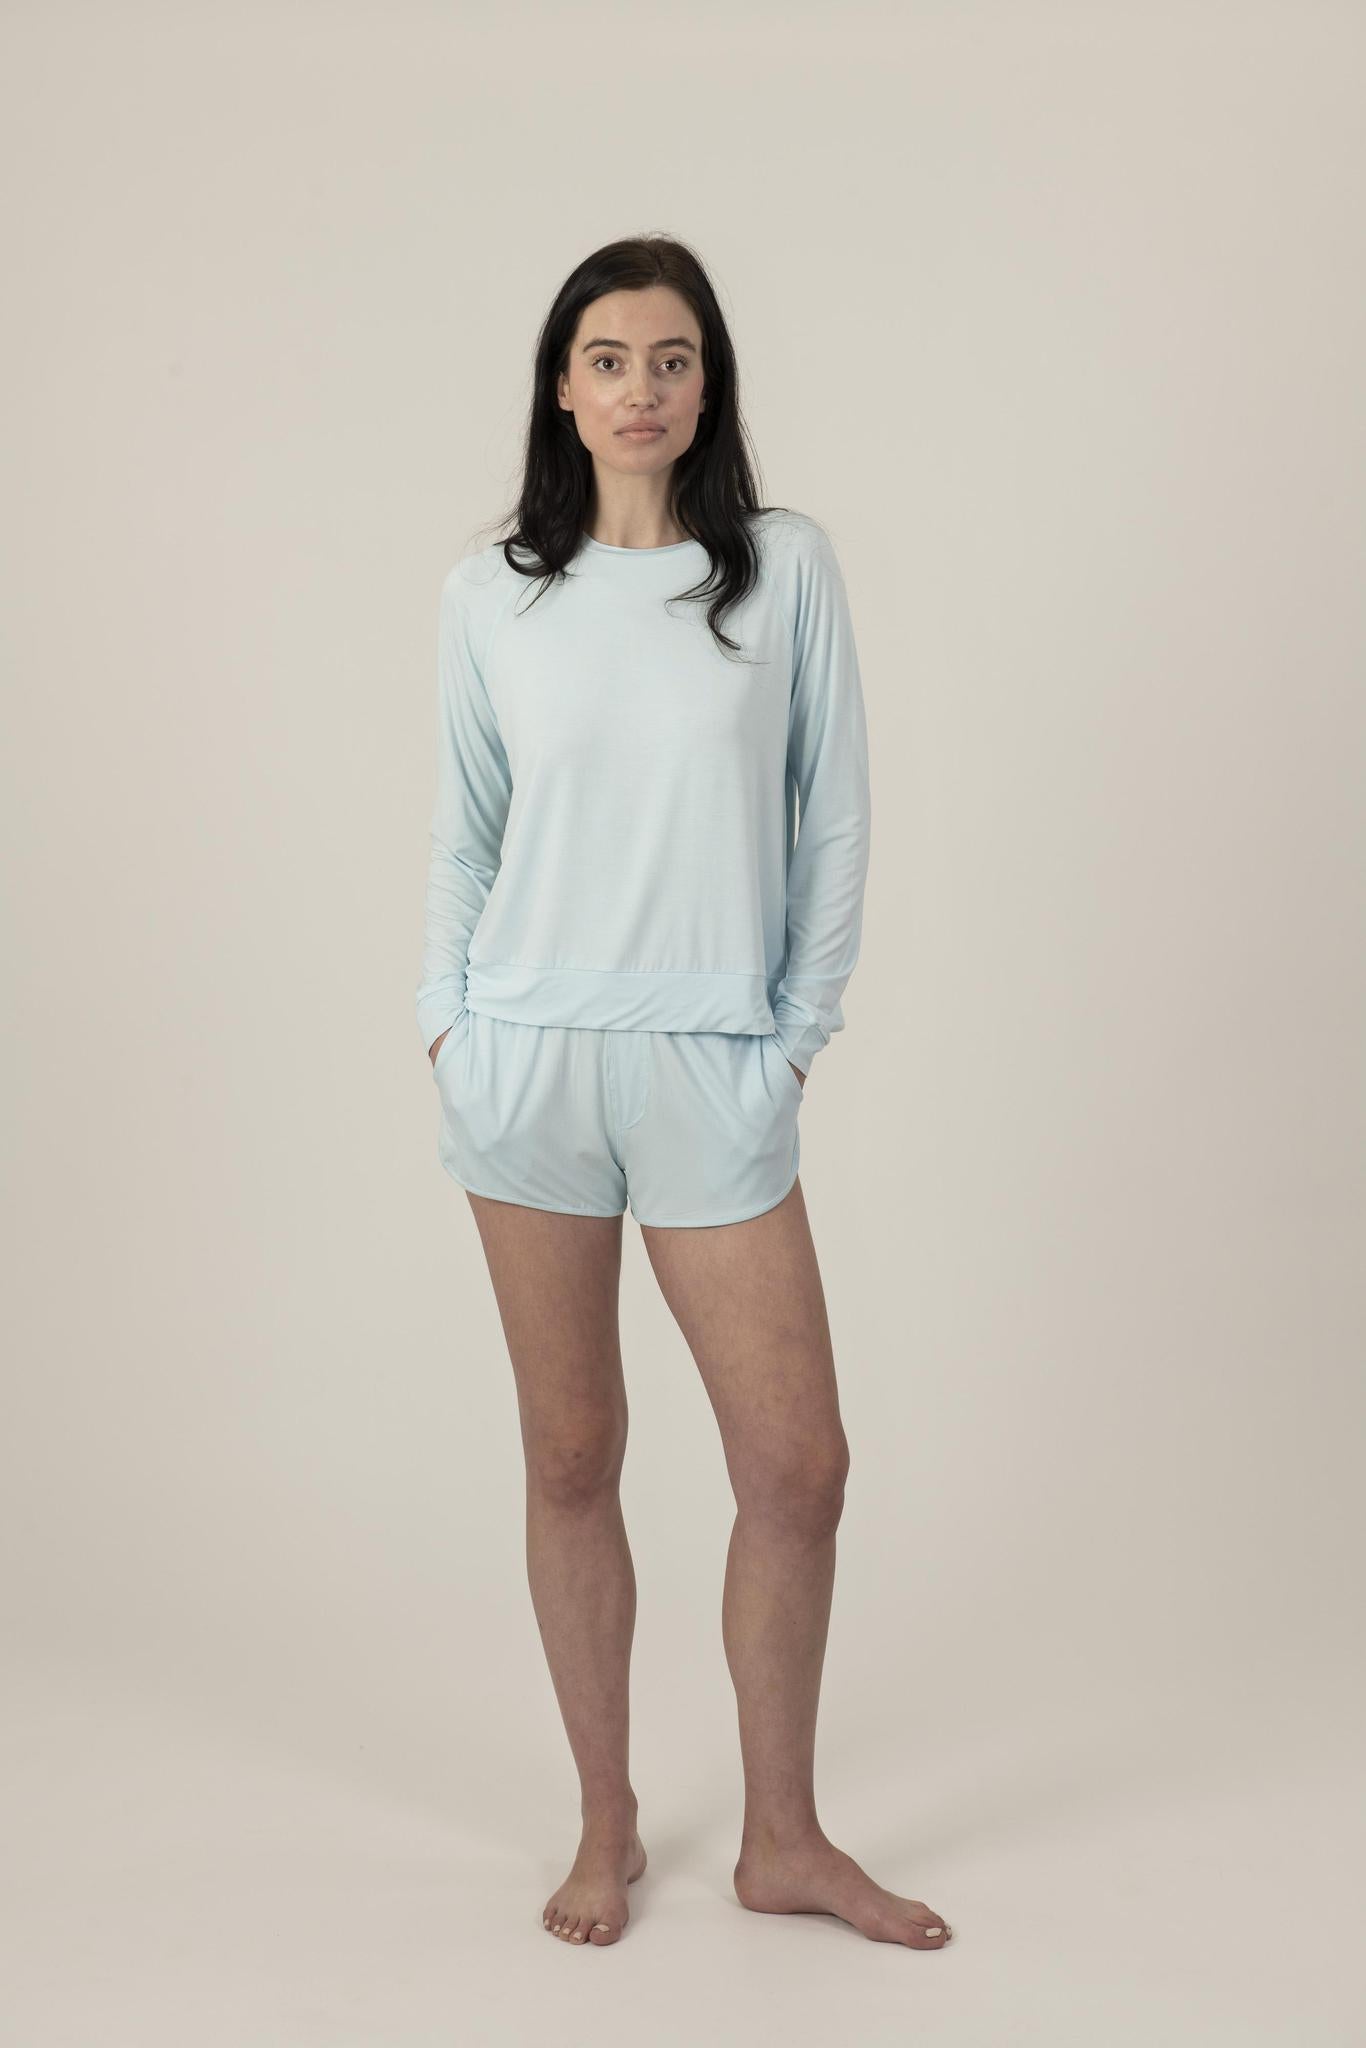 Hang out track shorts in ice blue